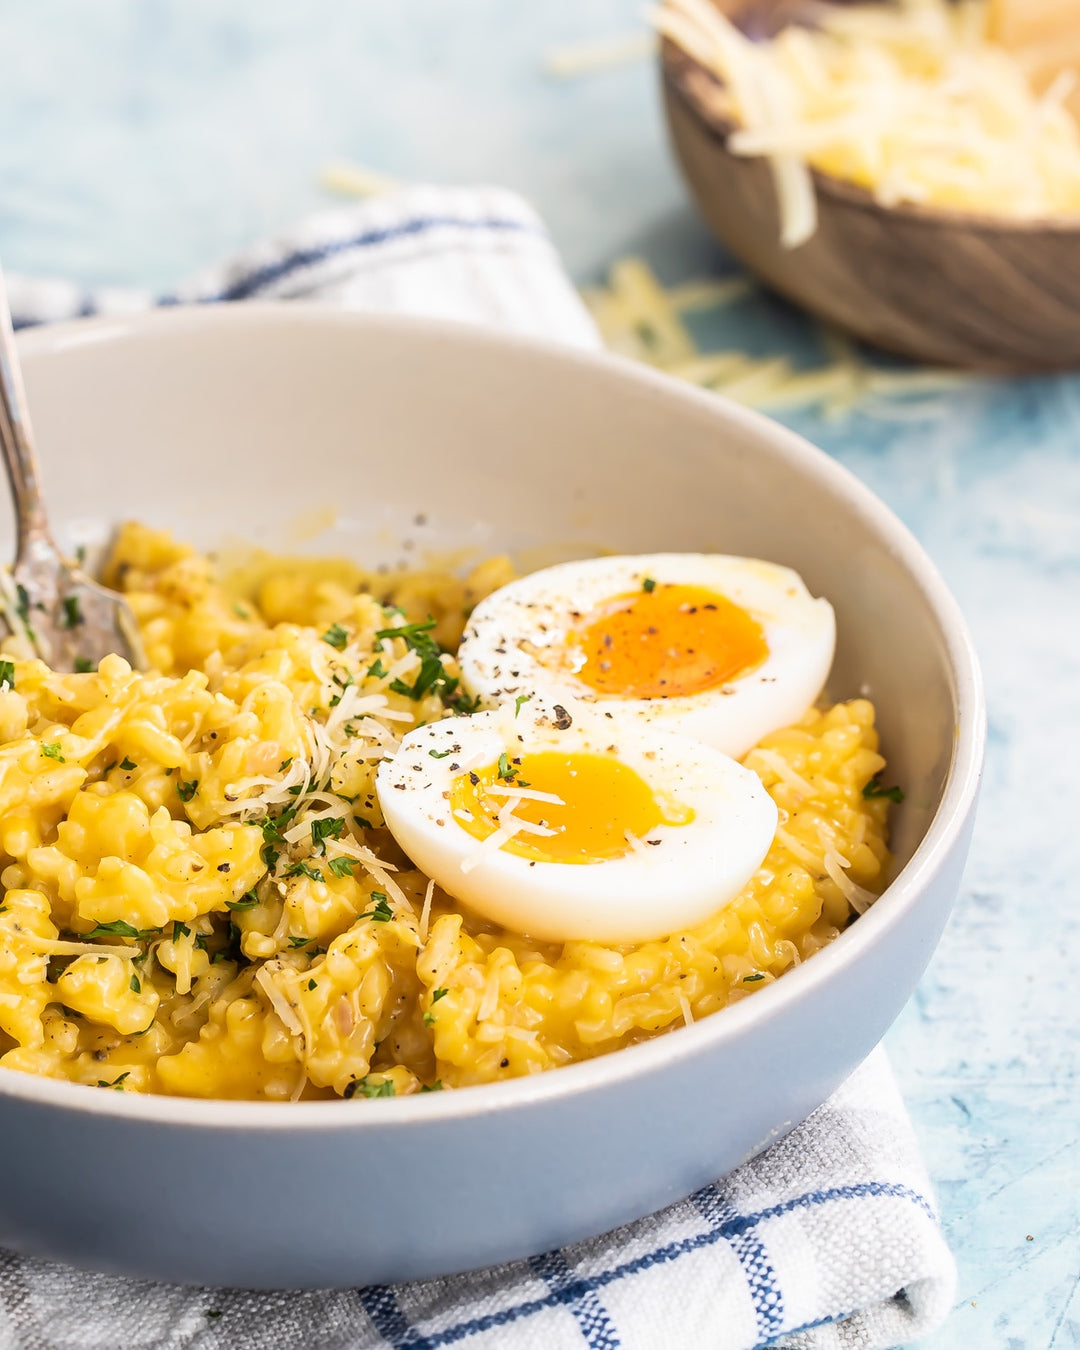 A hearty fall recipe for homemade butternut squash risotto topped with Parmesan cheese and soft-boiled eggs. | peteandgerrys.com